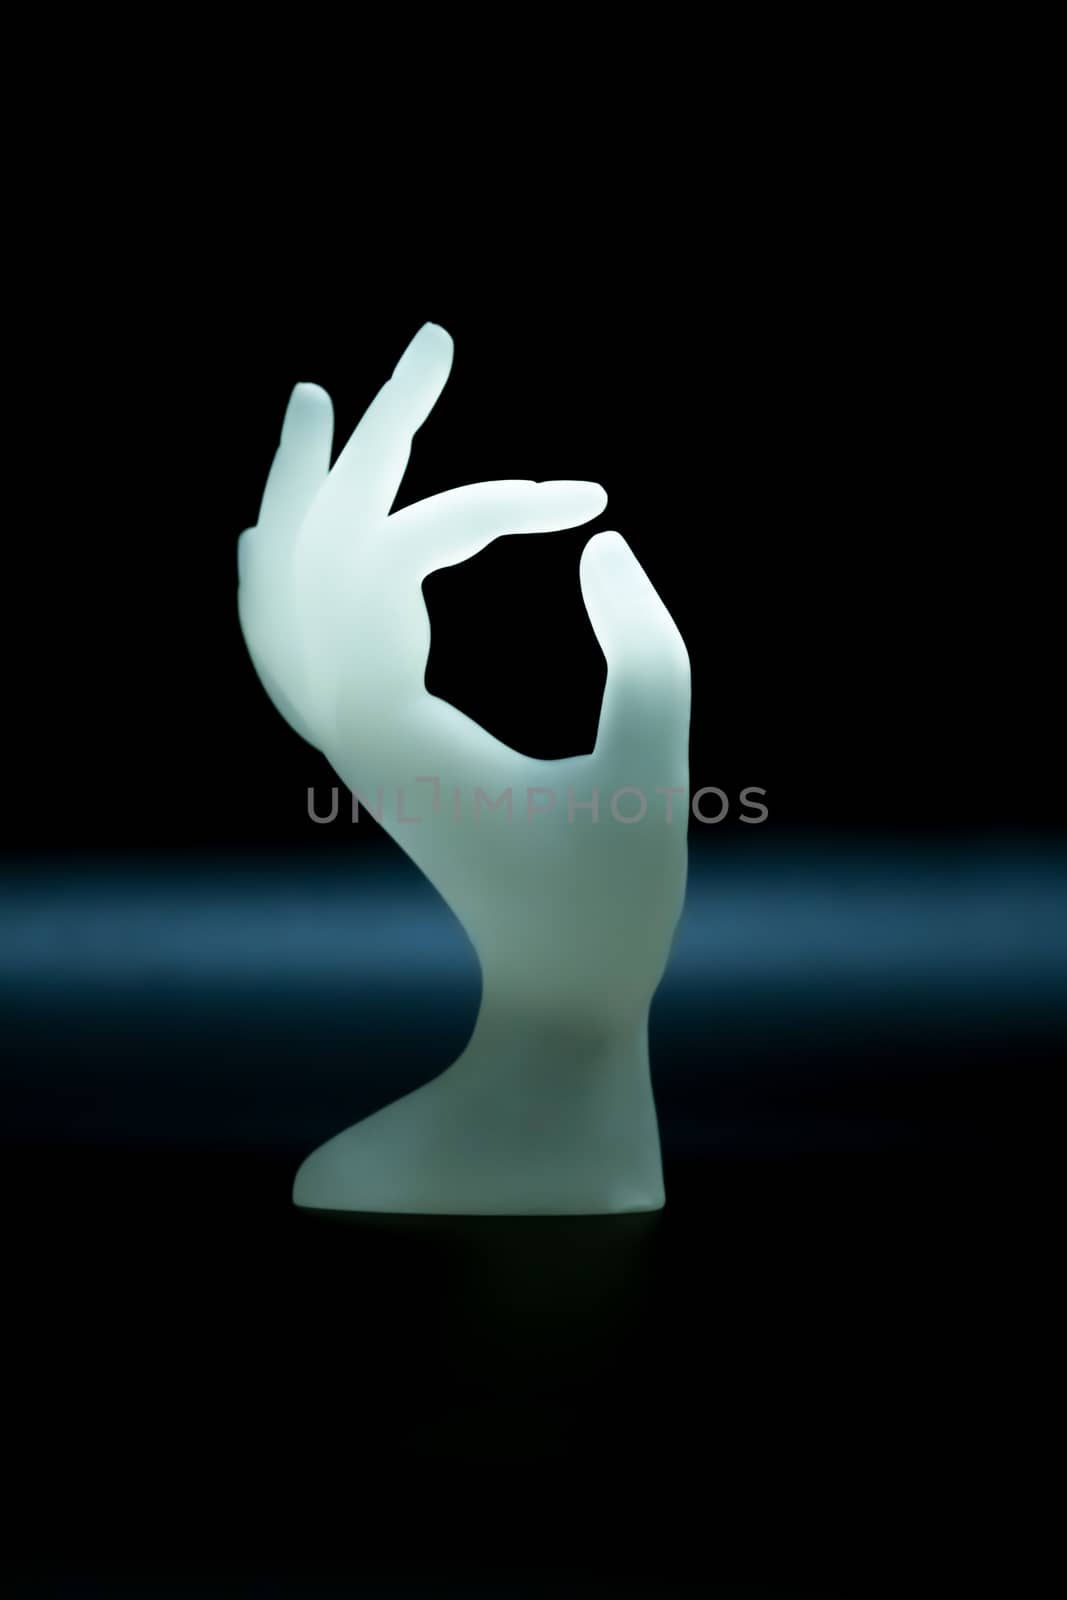 OK hand shape resin ring display holder for jewelry display on dark background use for advertising design for jewelry shop or nail salon with copy space